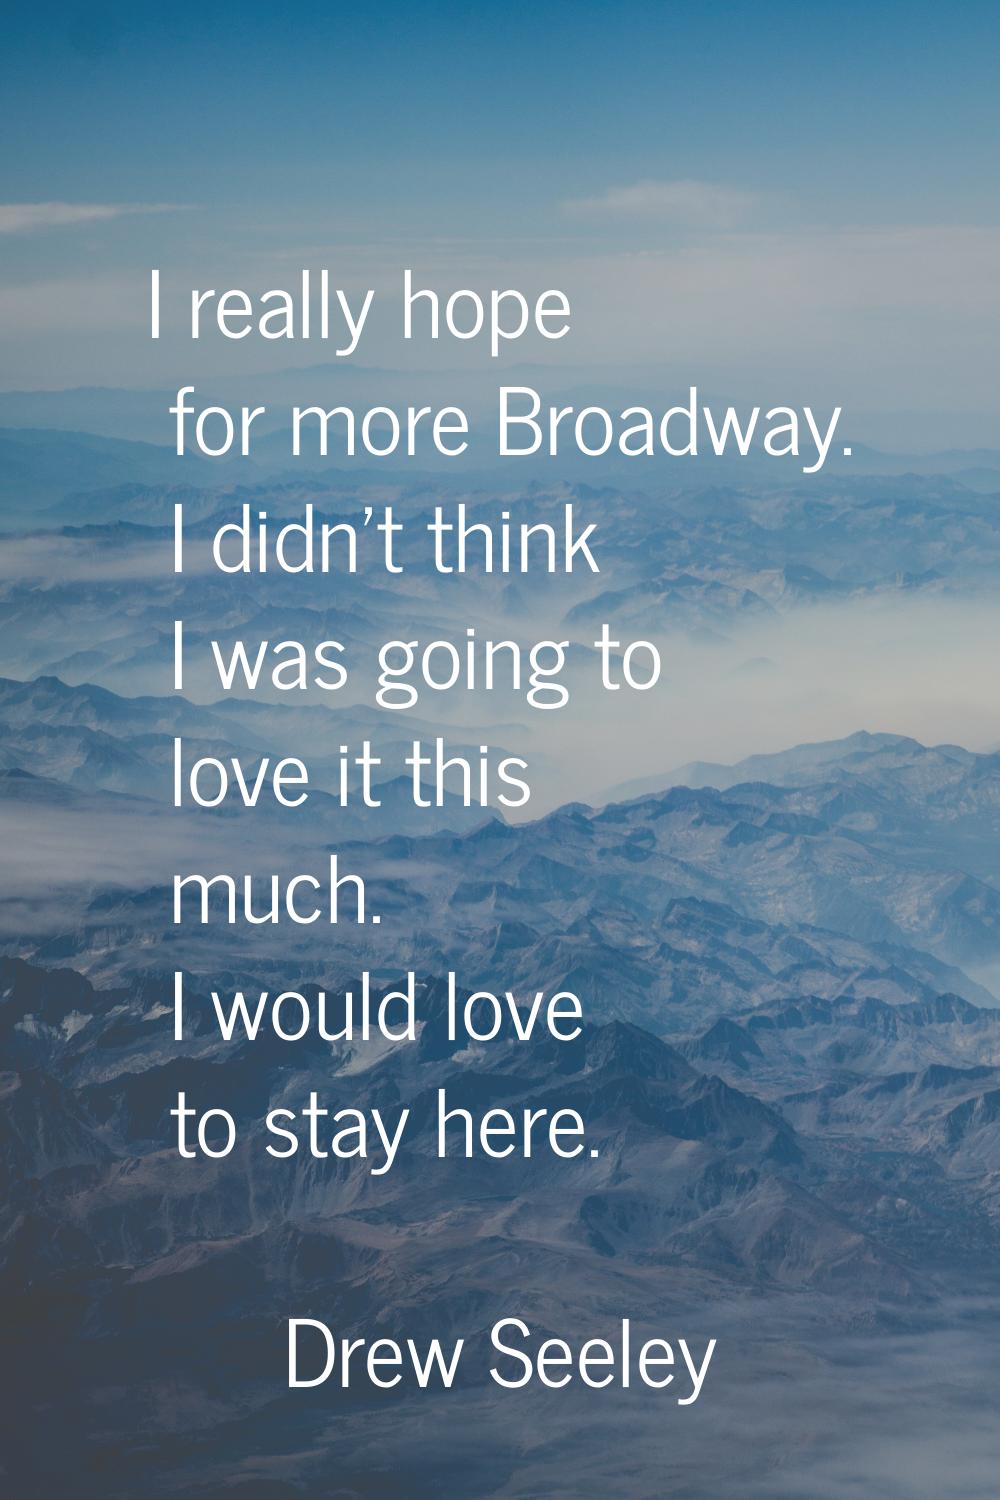 I really hope for more Broadway. I didn't think I was going to love it this much. I would love to s